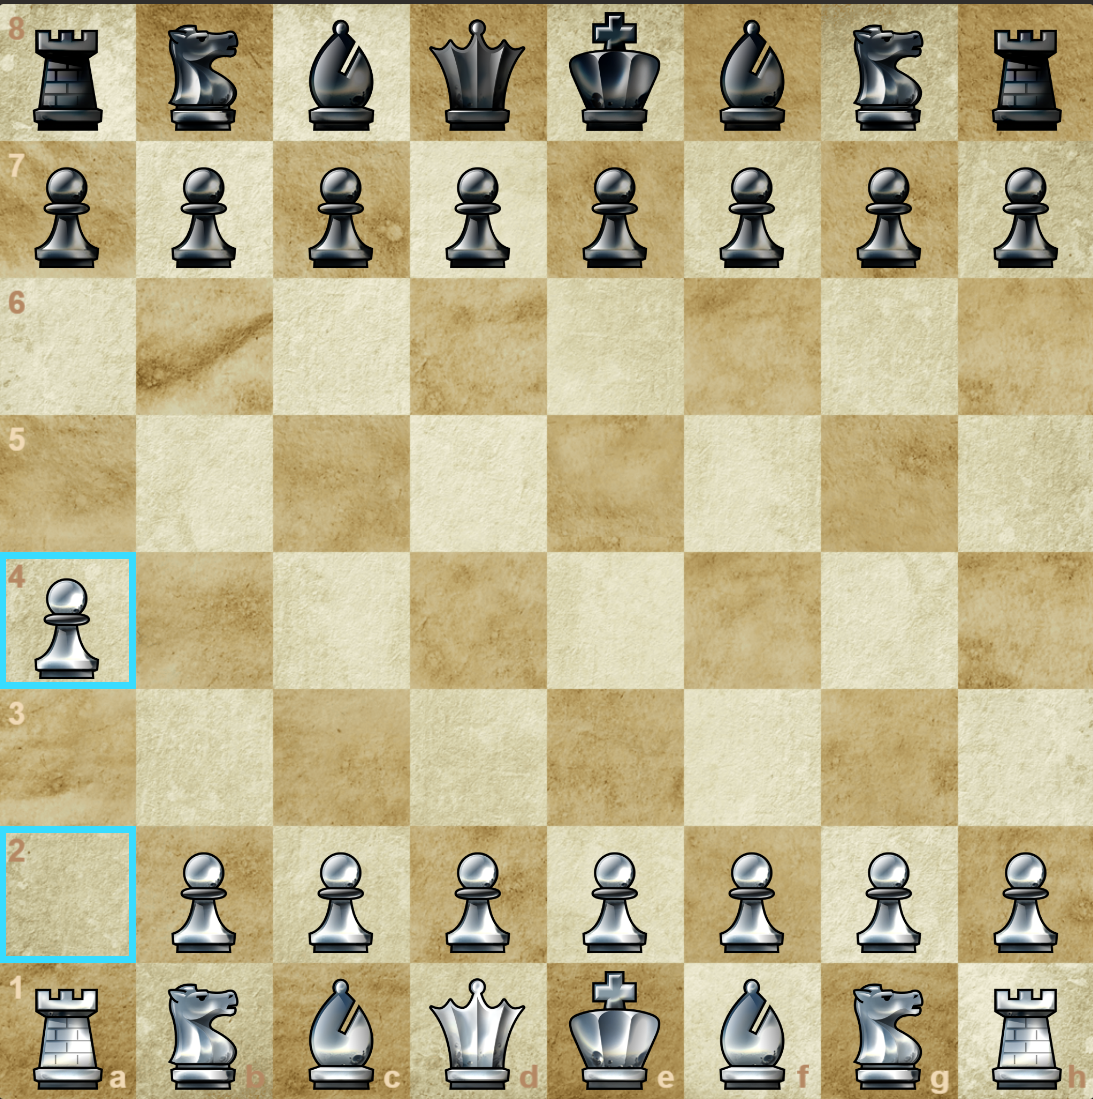 THE KING'S GAMBIT